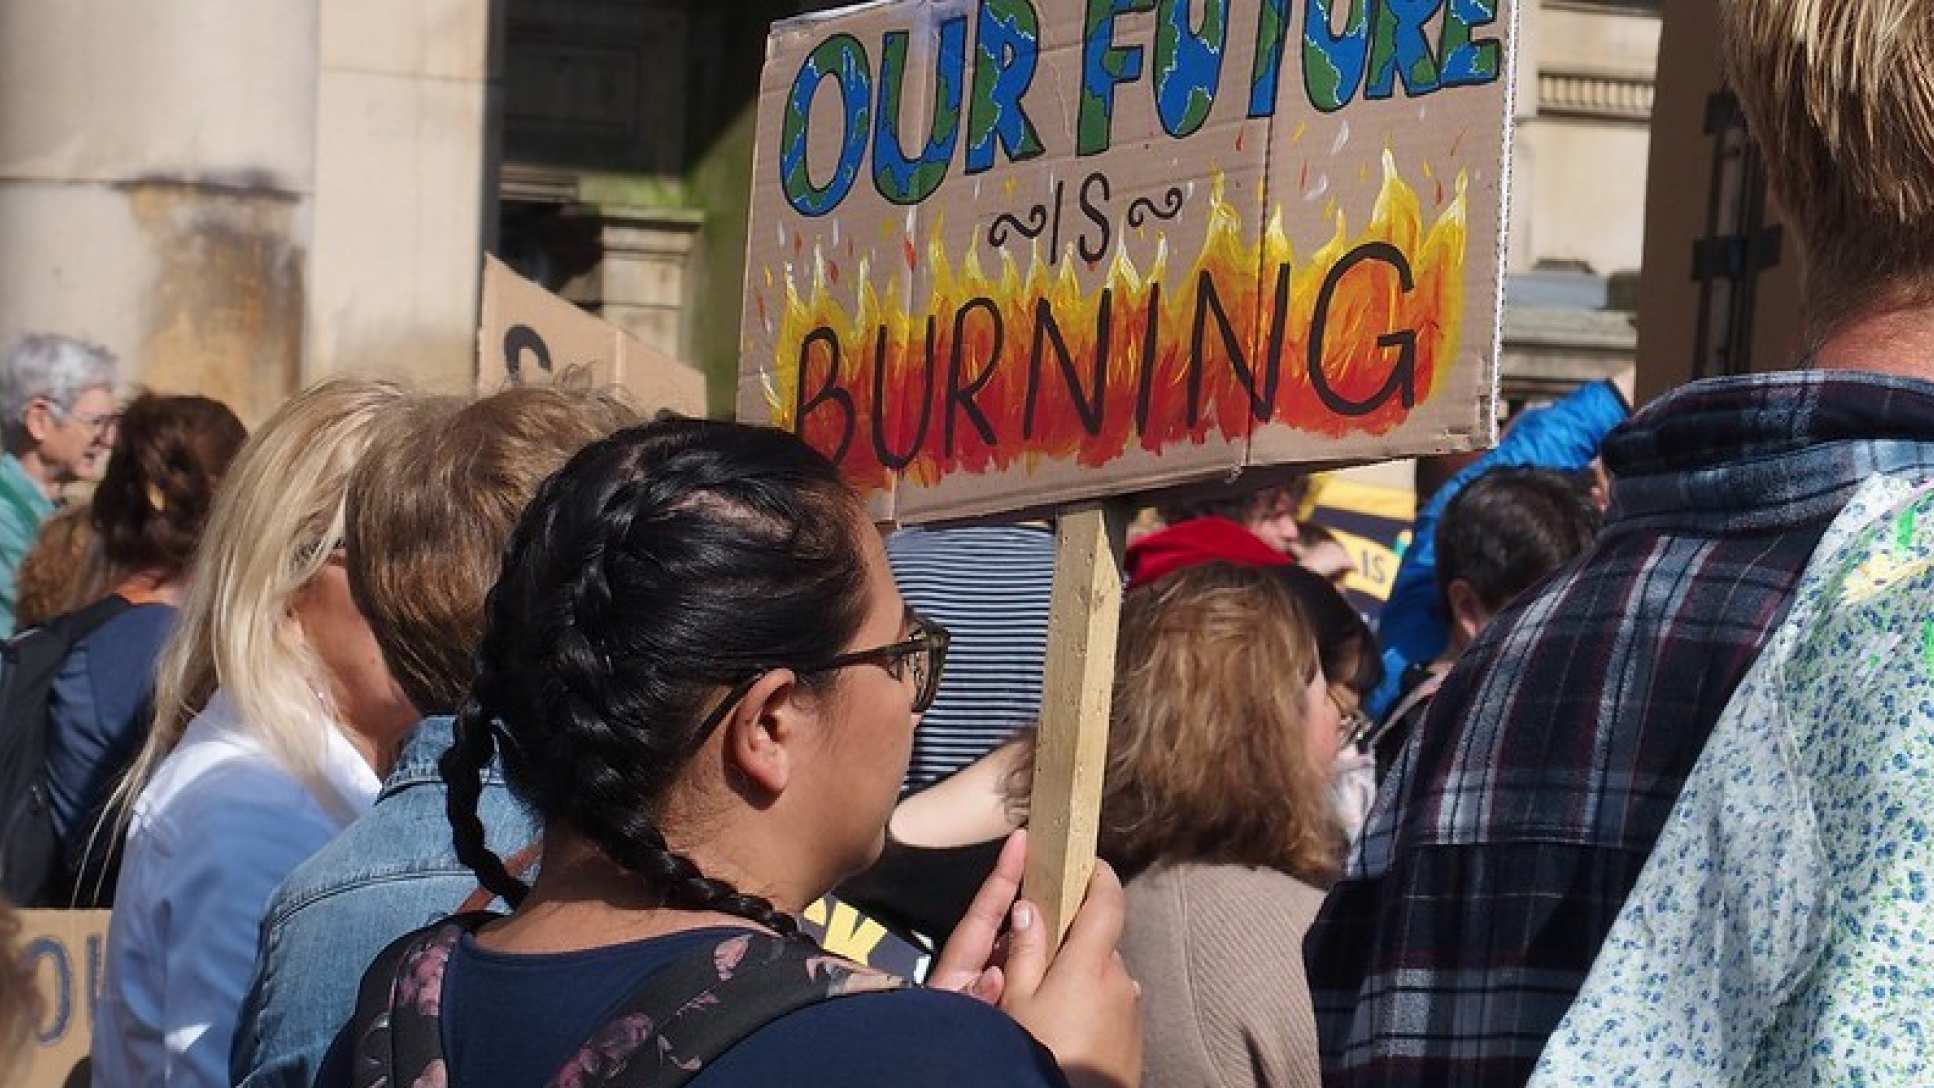 People gather at a protest, a sign reads: Our future is burning